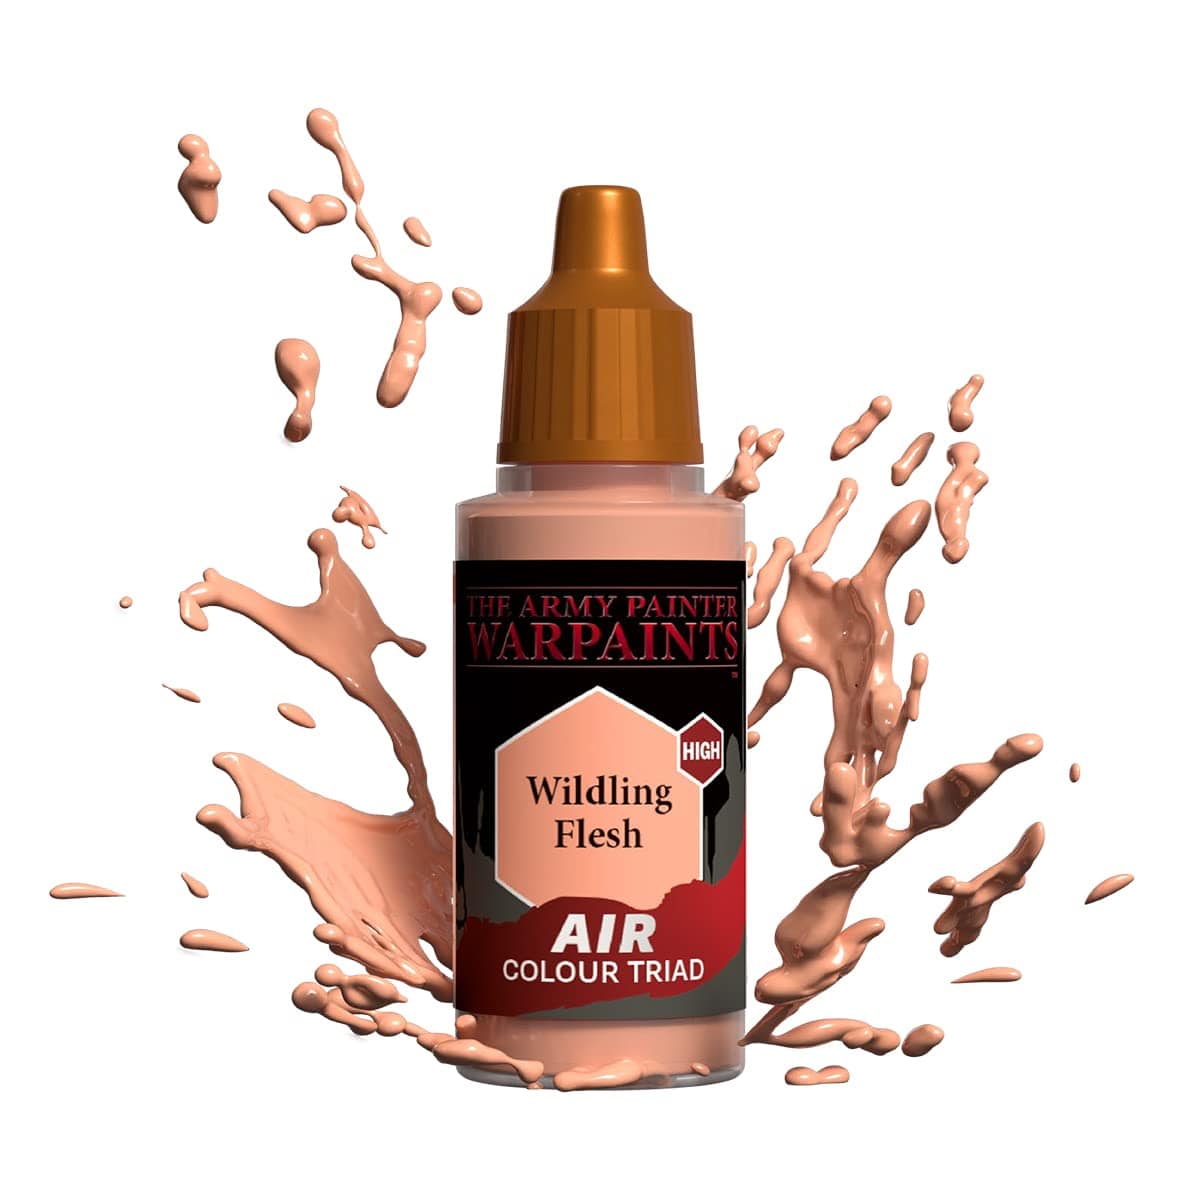 The Army Painter Accessories The Army Painter Warpaints Air: Wildling Flesh 18ml